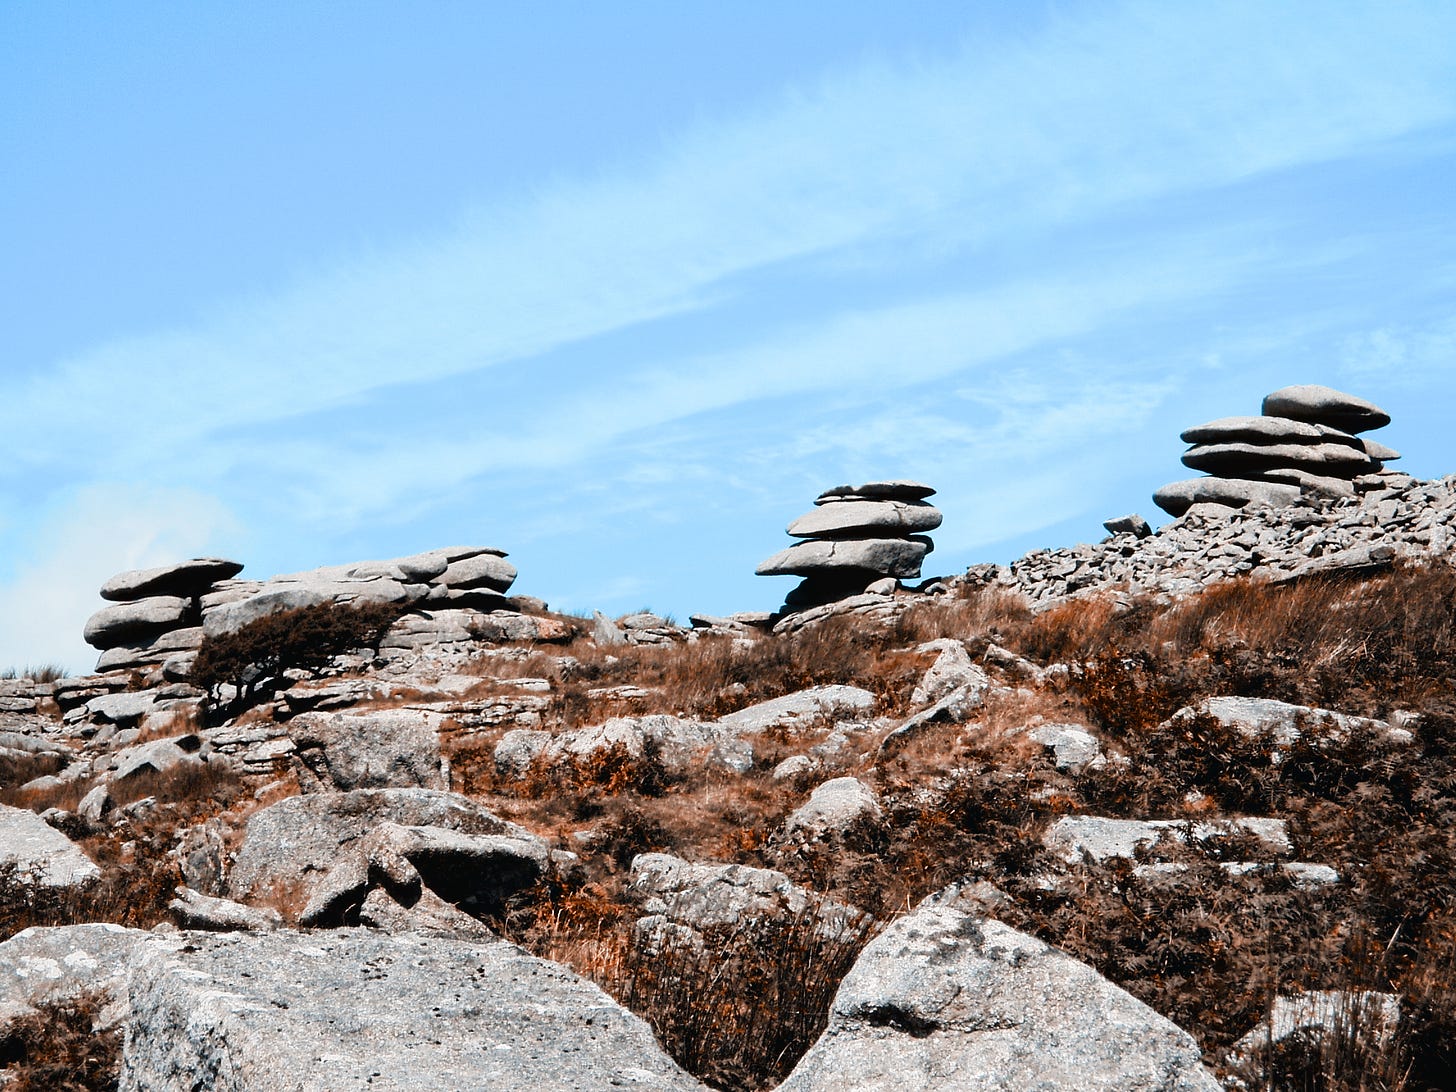 Looking across to the stone stacks